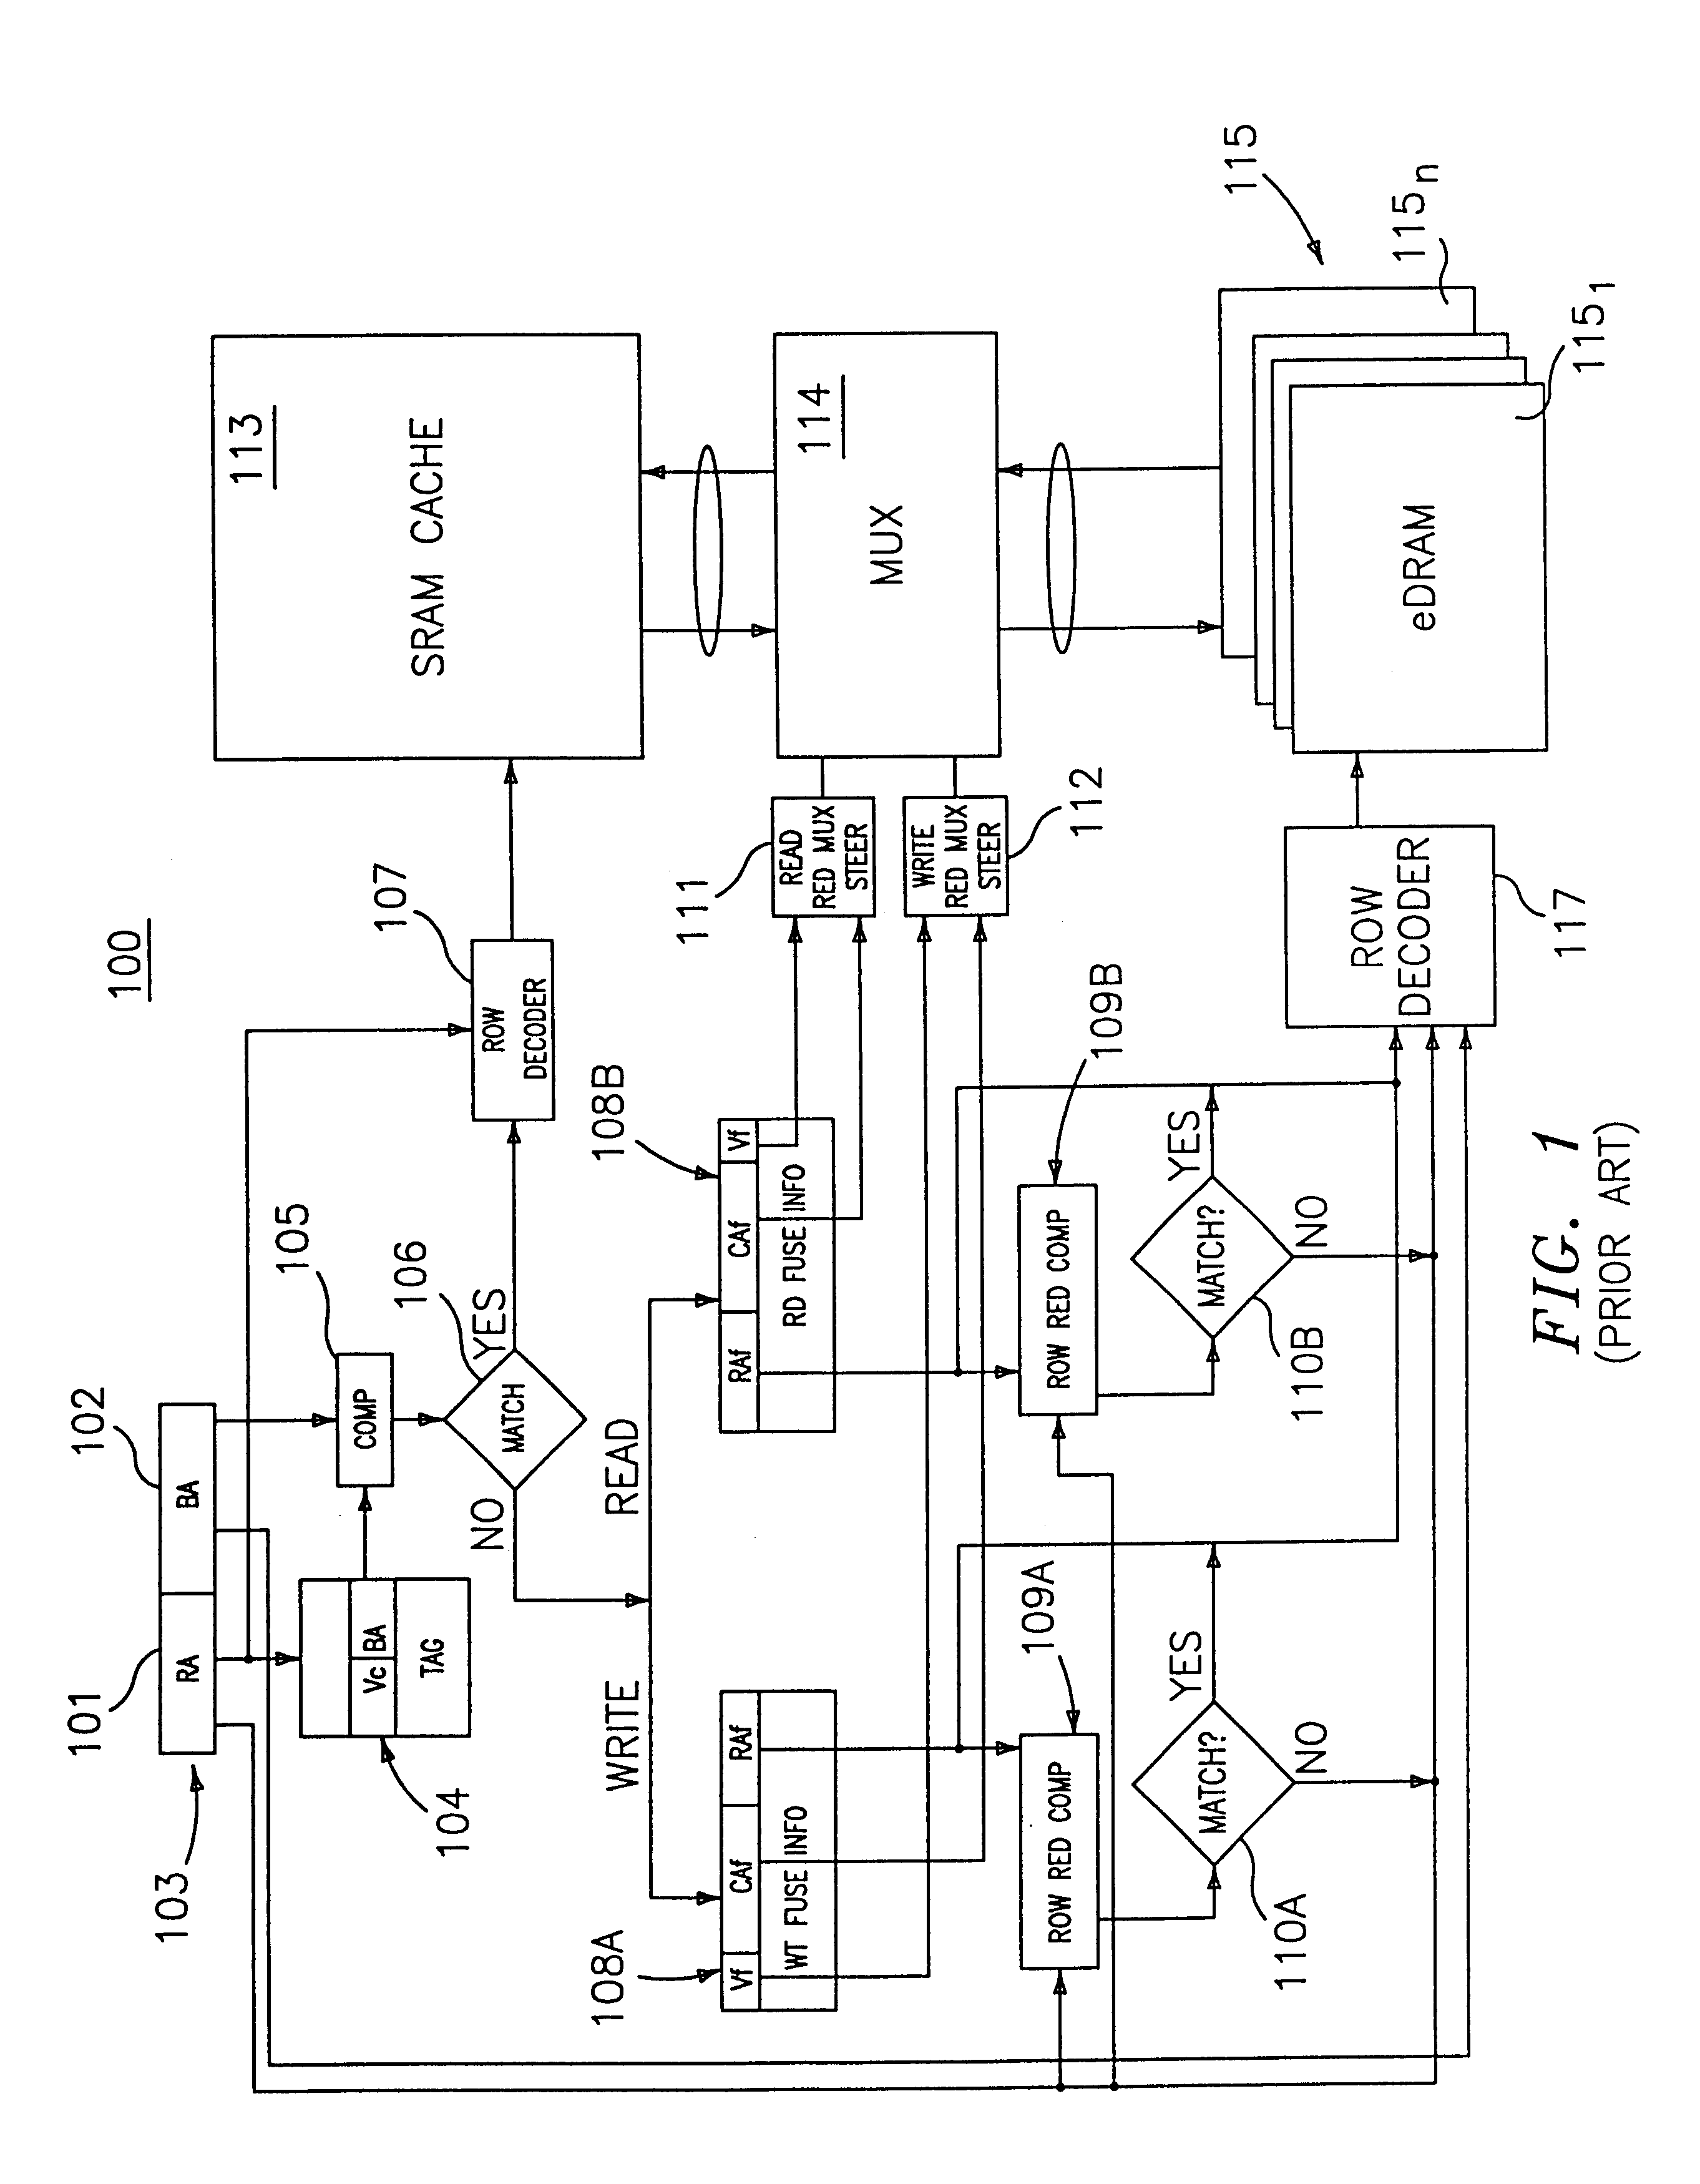 Unified SRAM cache system for an embedded DRAM system having a micro-cell architecture